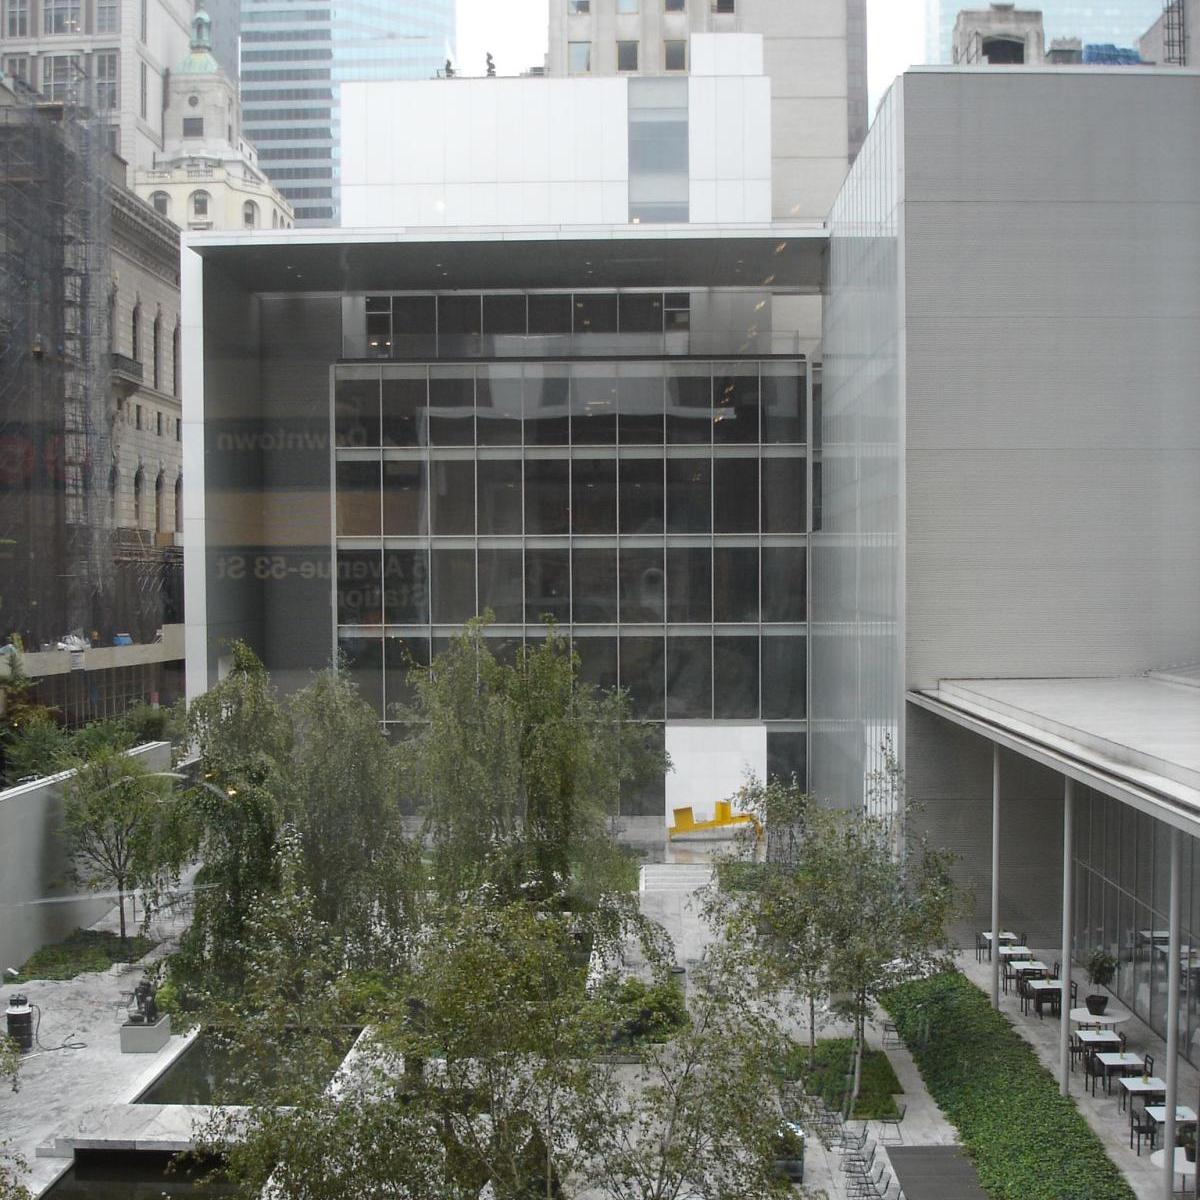 Strike MoMA Continues With Weekly Protests - Opinion